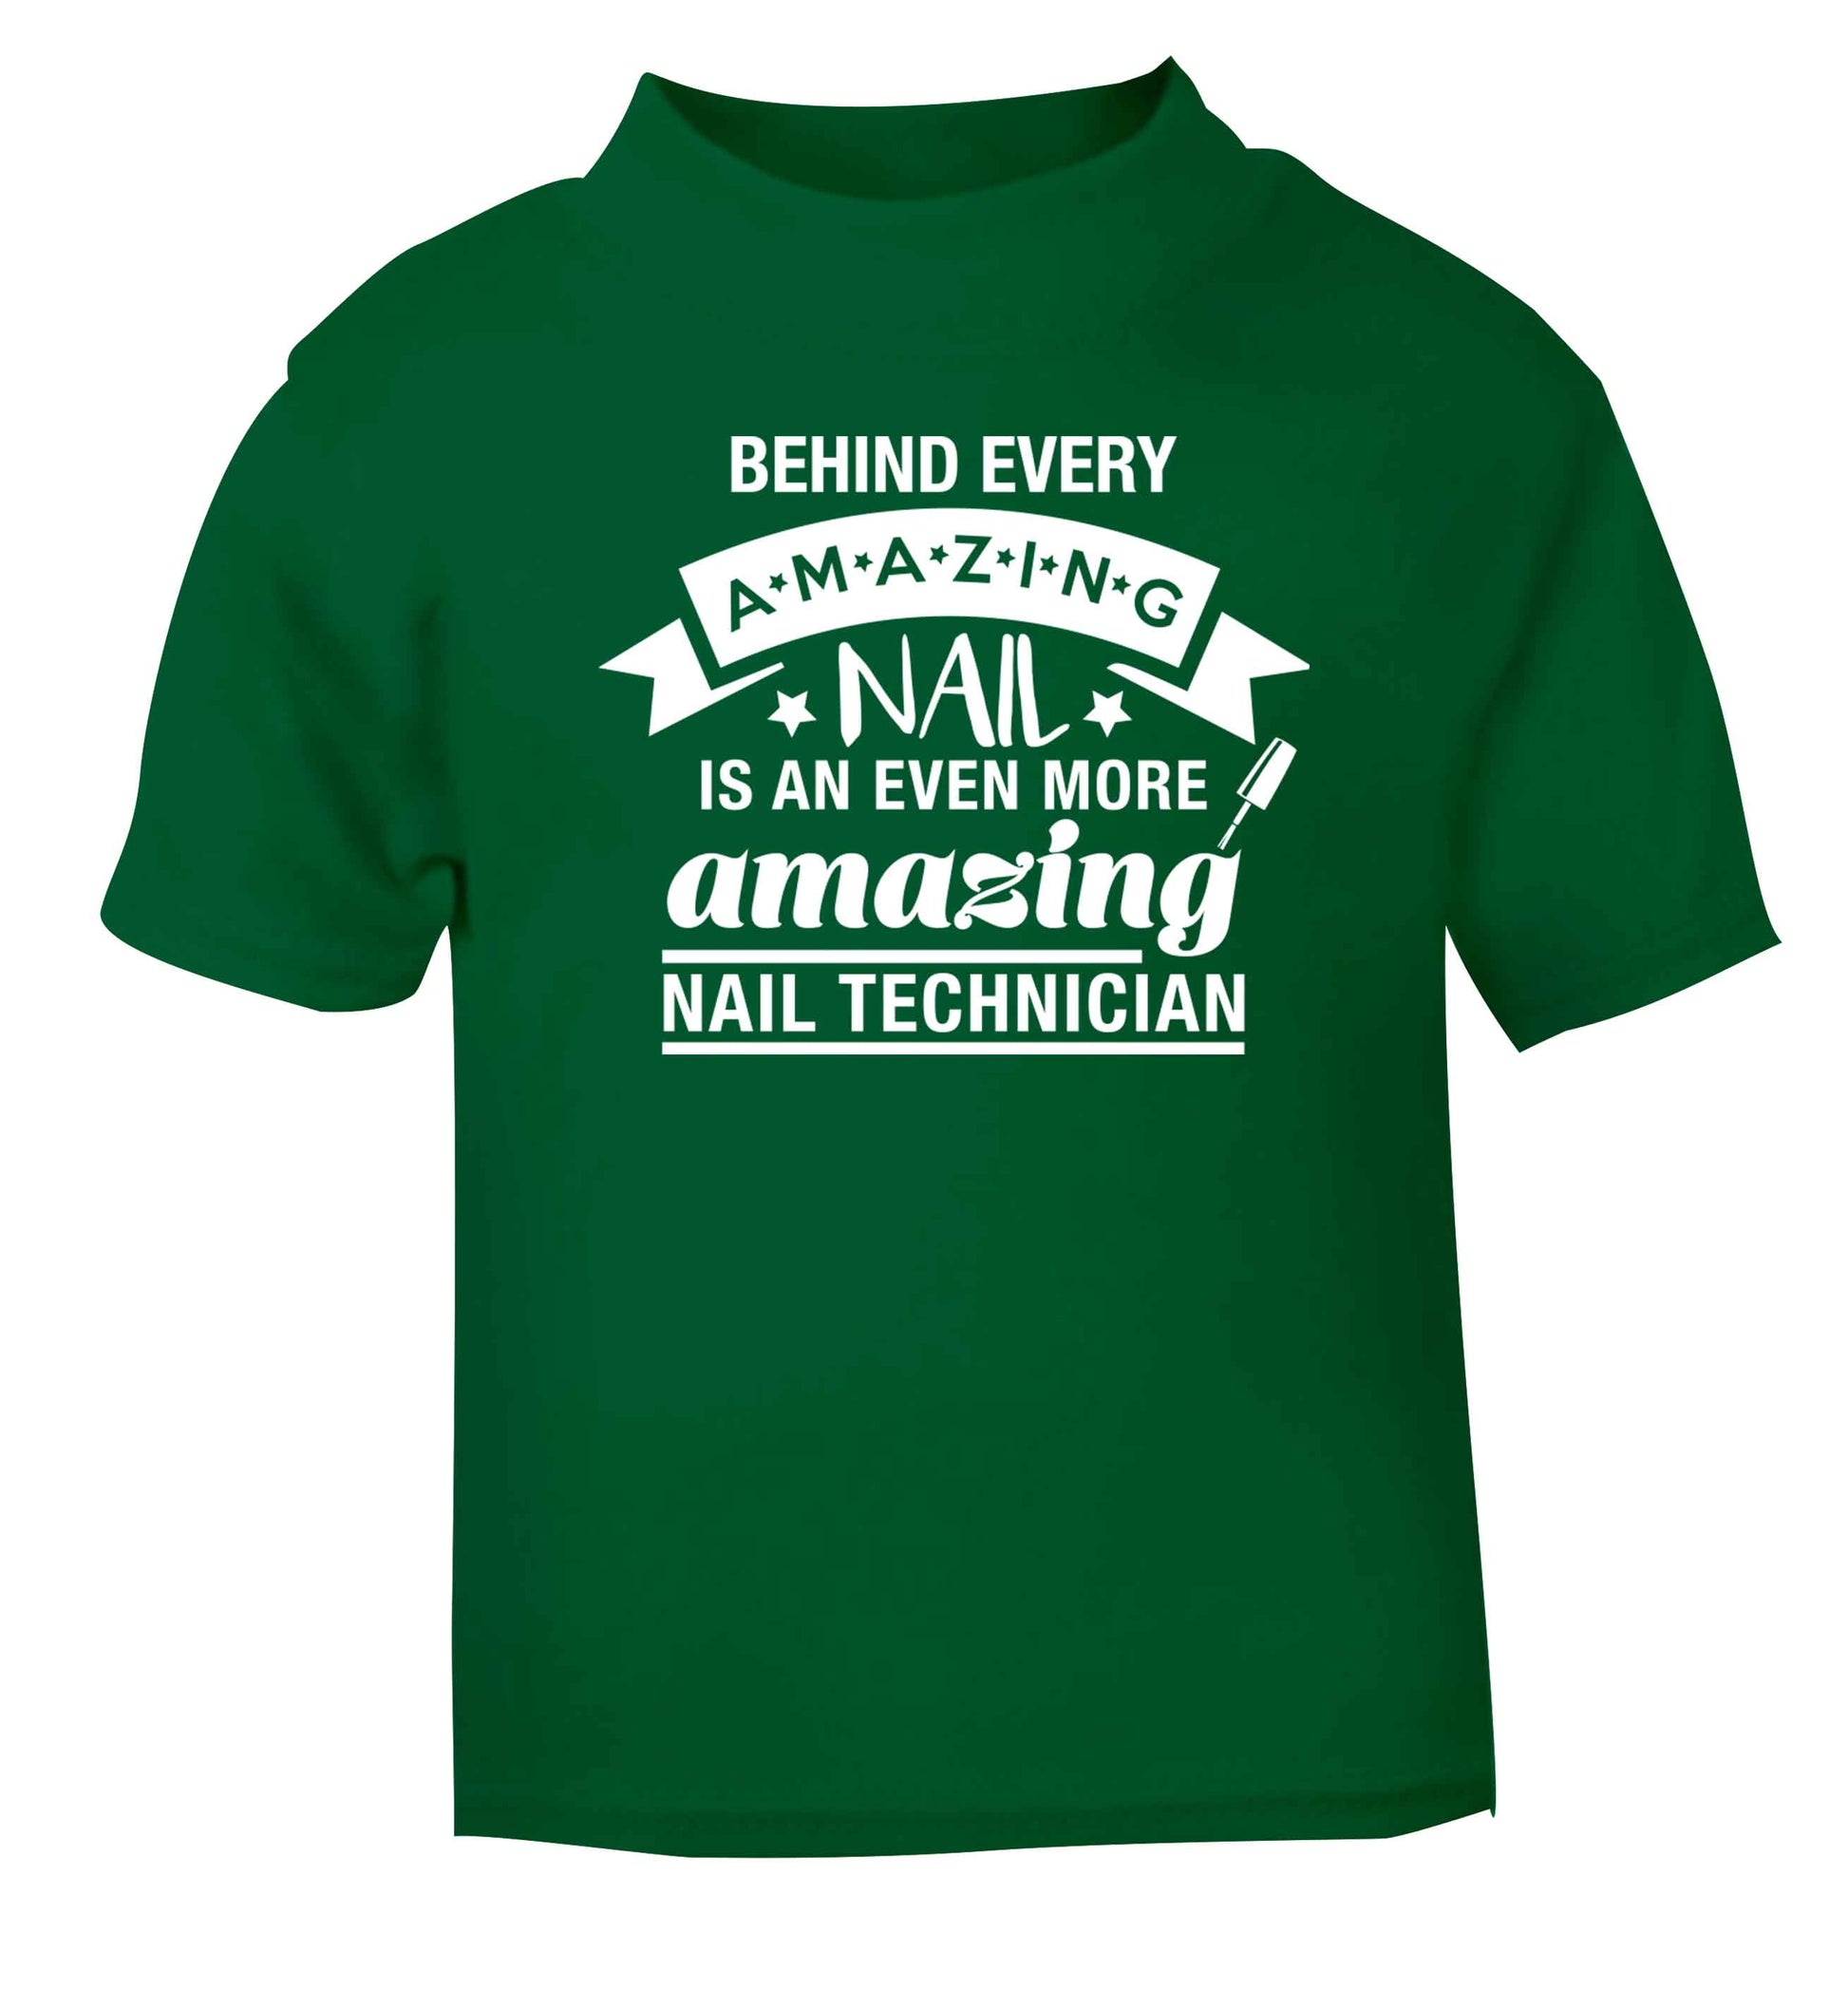 Behind every amazing nail is an even more amazing nail technician green baby toddler Tshirt 2 Years